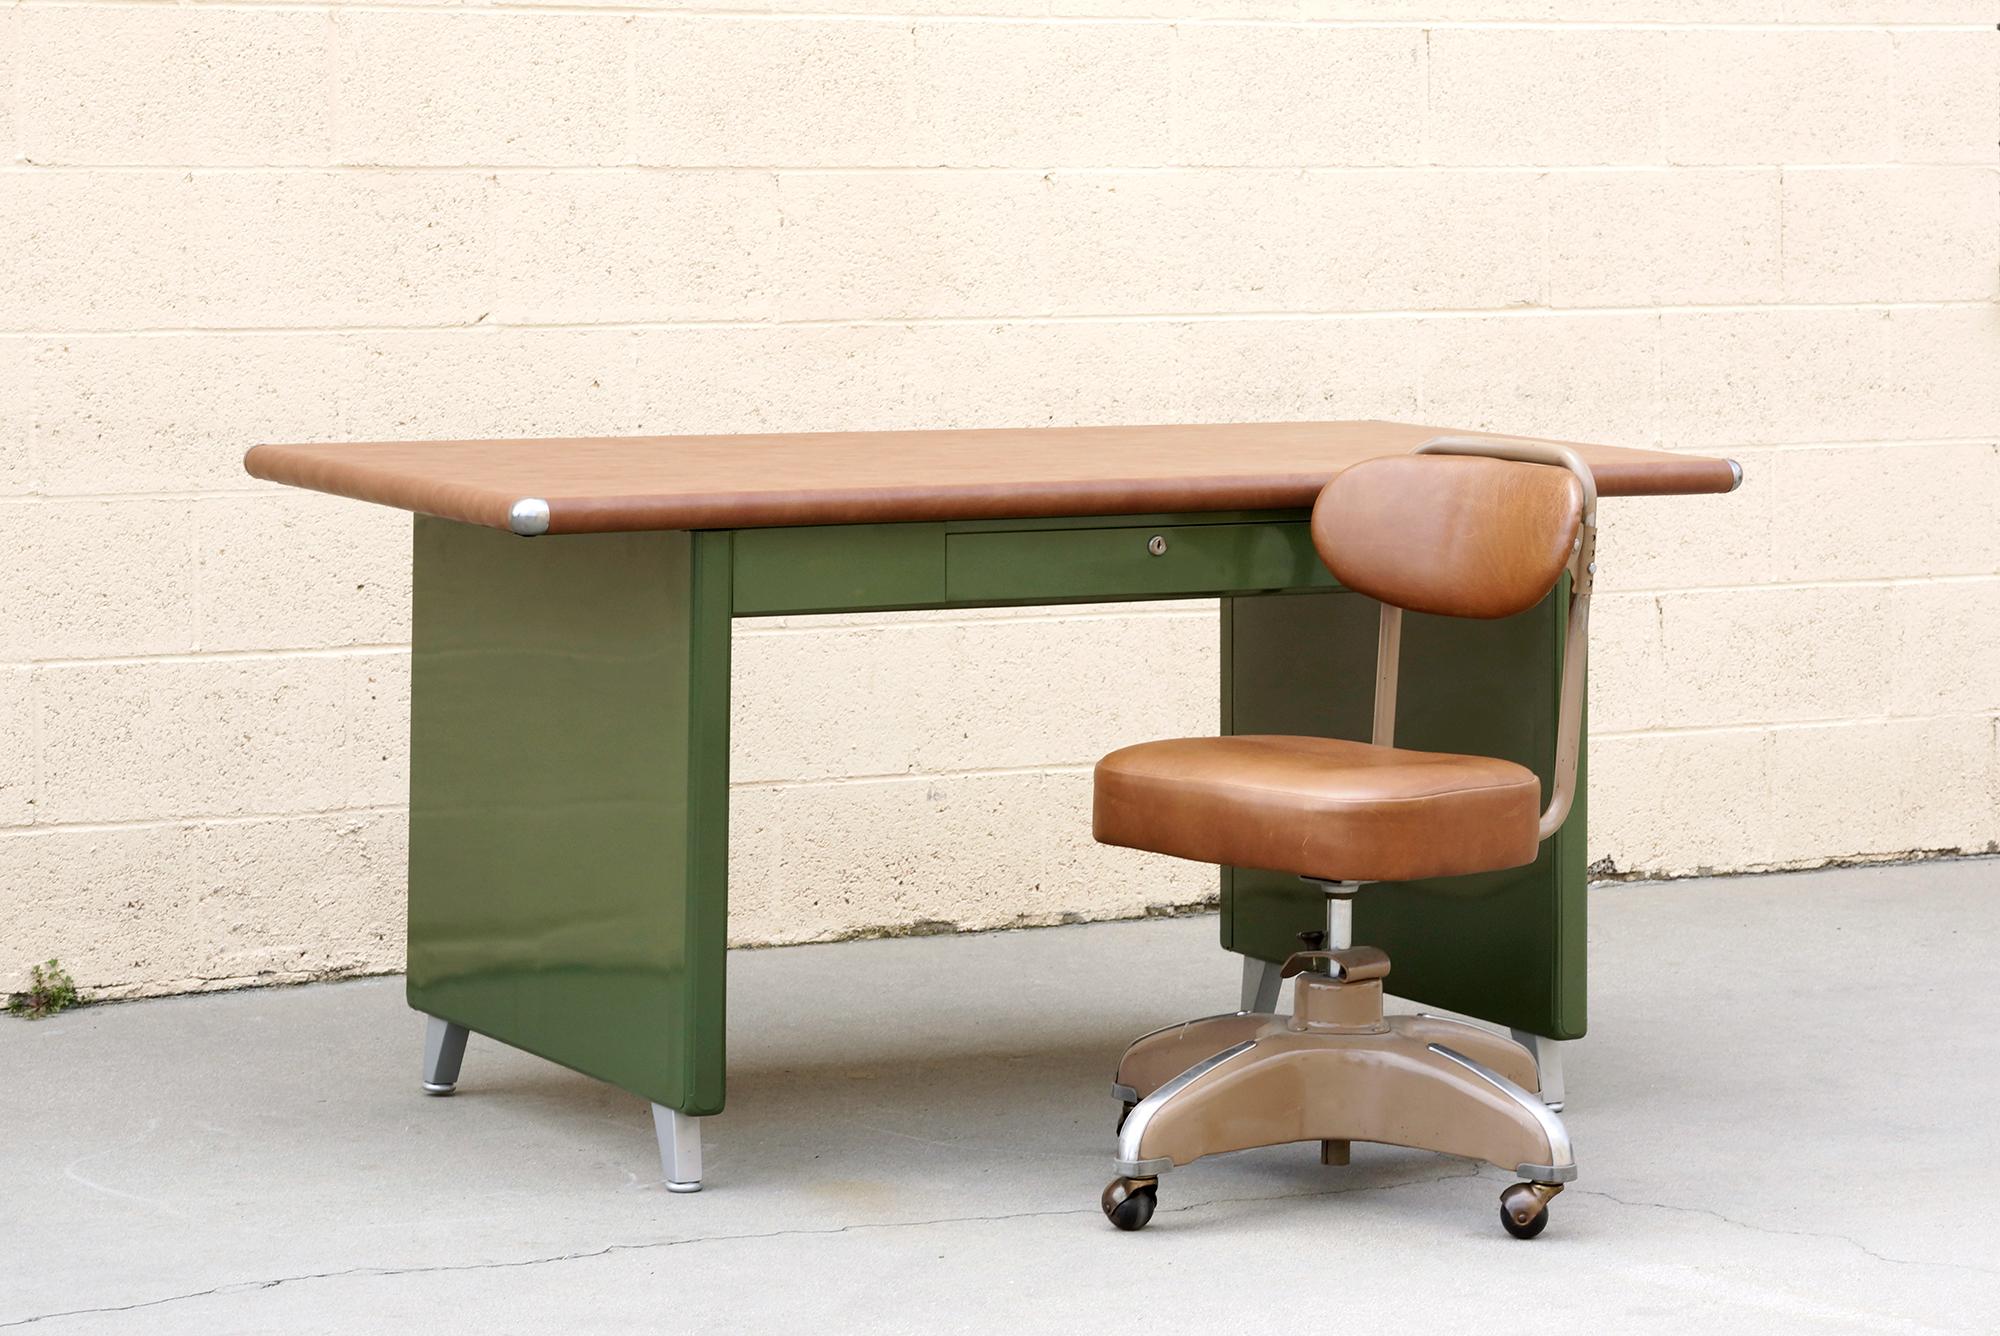 What a beauty! We refinished this rare 1940s Shaw Walker panel leg tanker table in an army green powder coat with a camel-colored vinyl top. Original splayed legs powder coated in metallic silver; polished steel table-top bumpers. Features a single